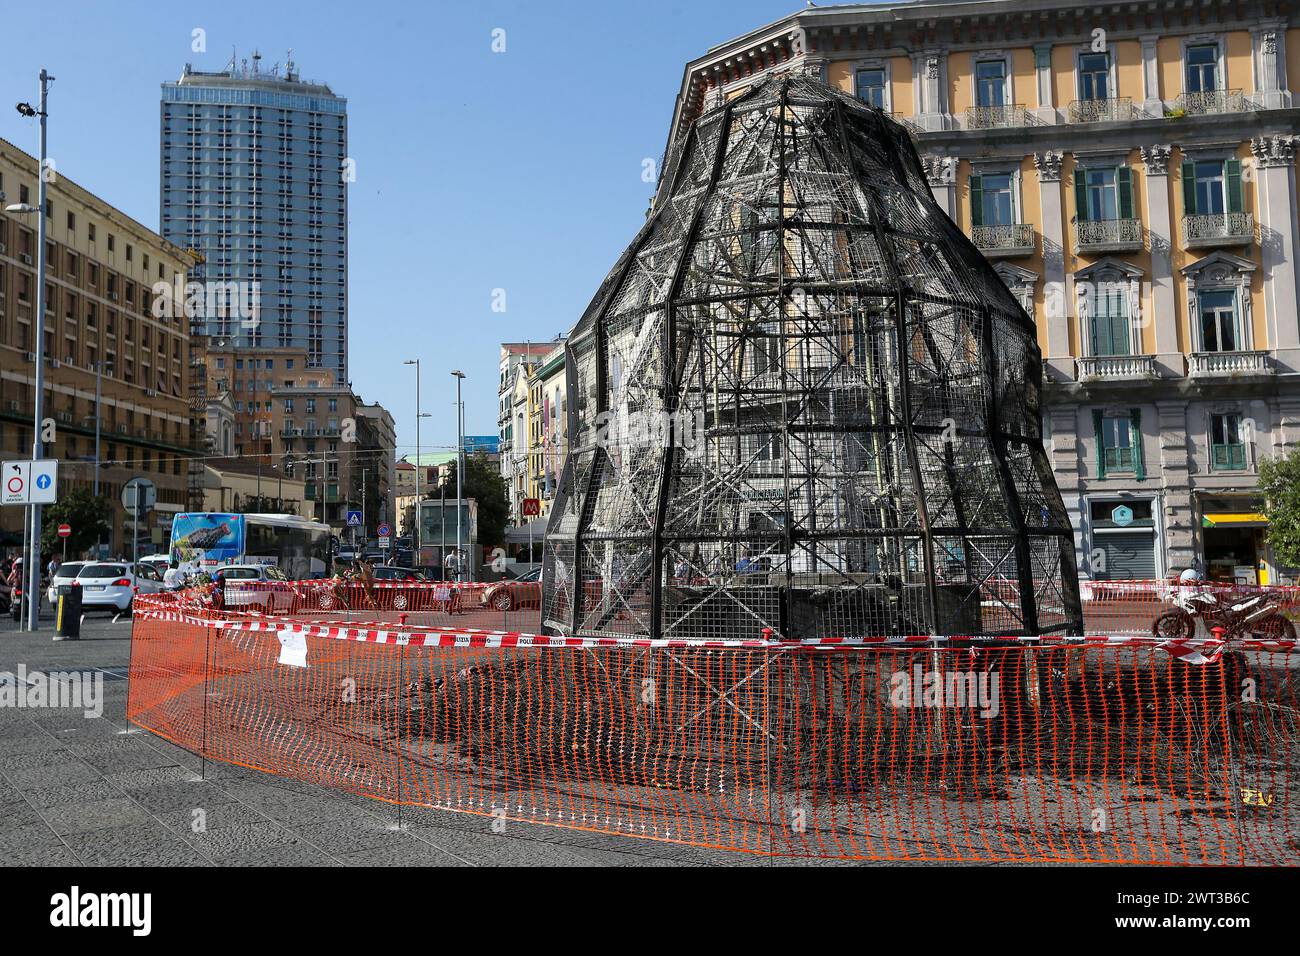 The structure of the giant Venus of the Rags by Michelangelo Pistoletto, completely burnt after unknown people set it on fire at dawn, in Municipio sq Stock Photo